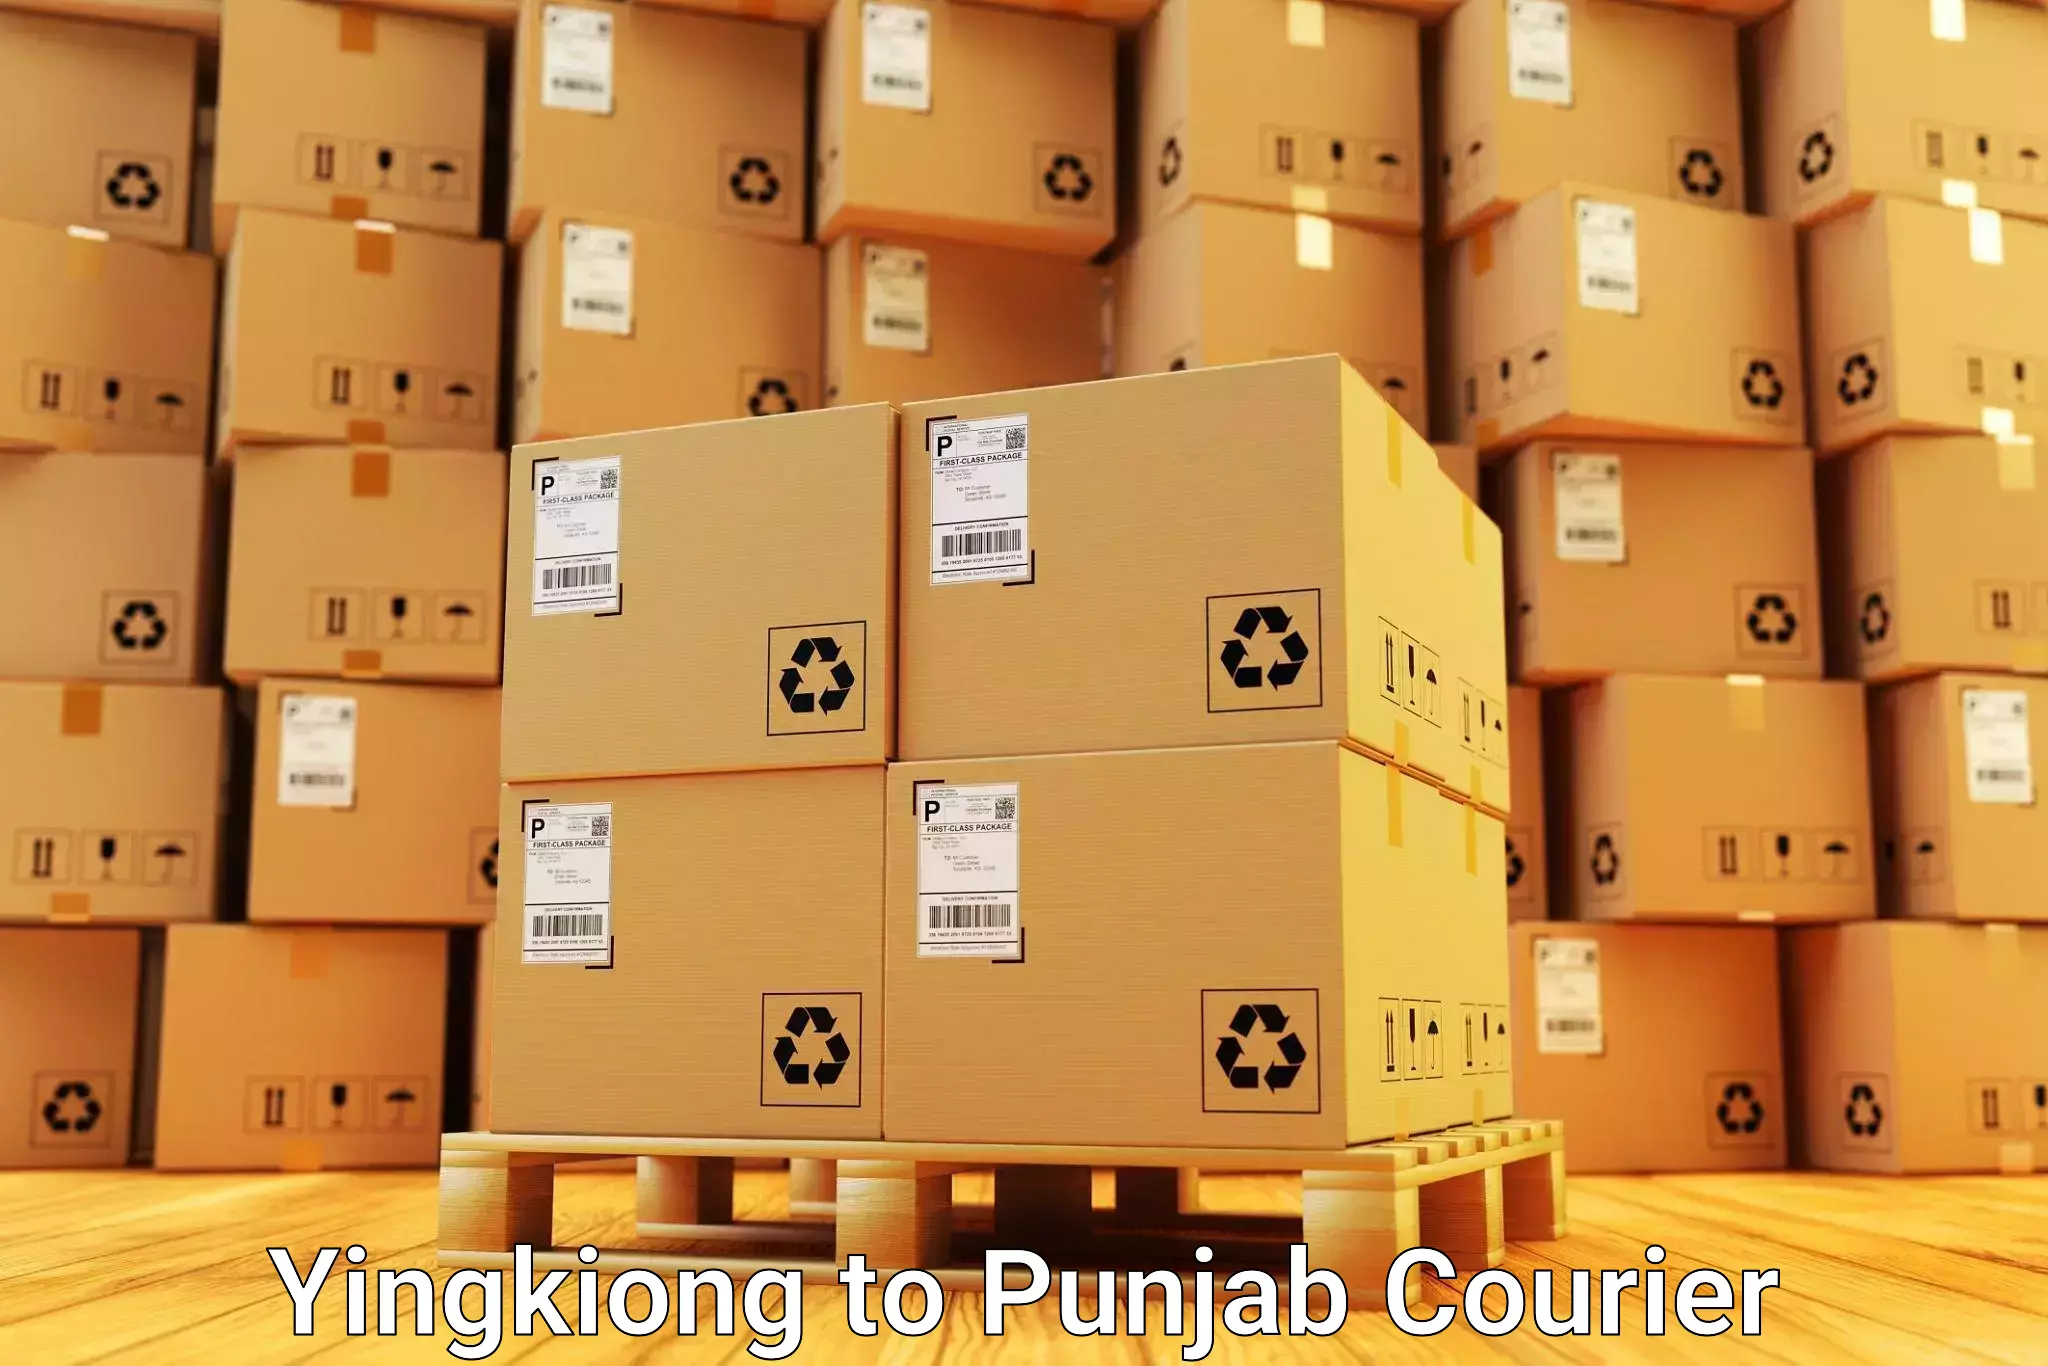 Moving and packing experts Yingkiong to Punjab